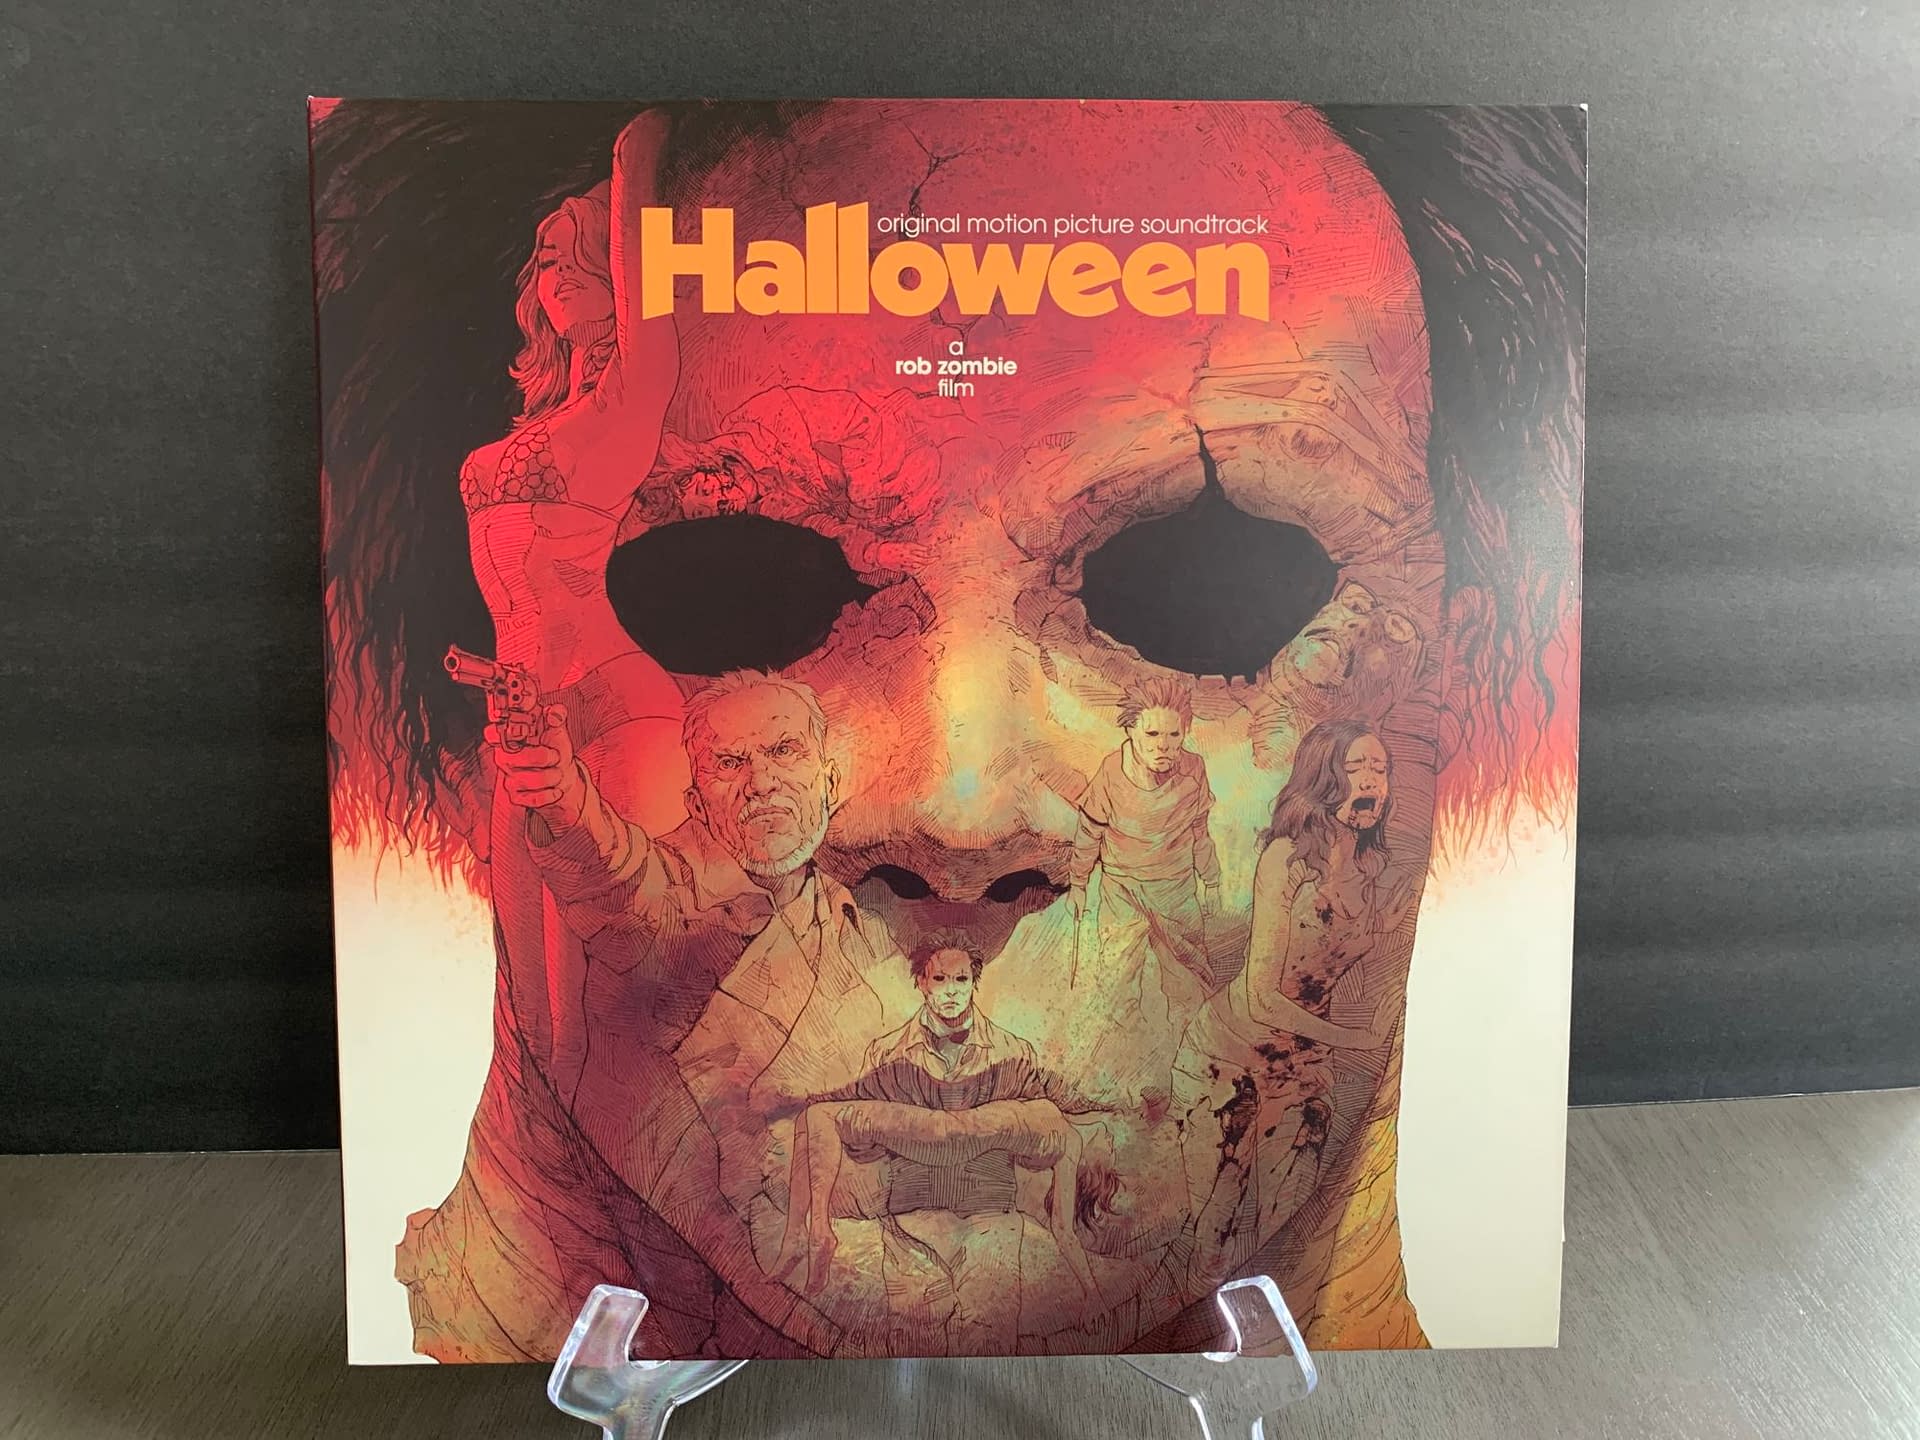 We Take A Look At Waxwork Records Rob Zombie Halloween Vinyl Releases